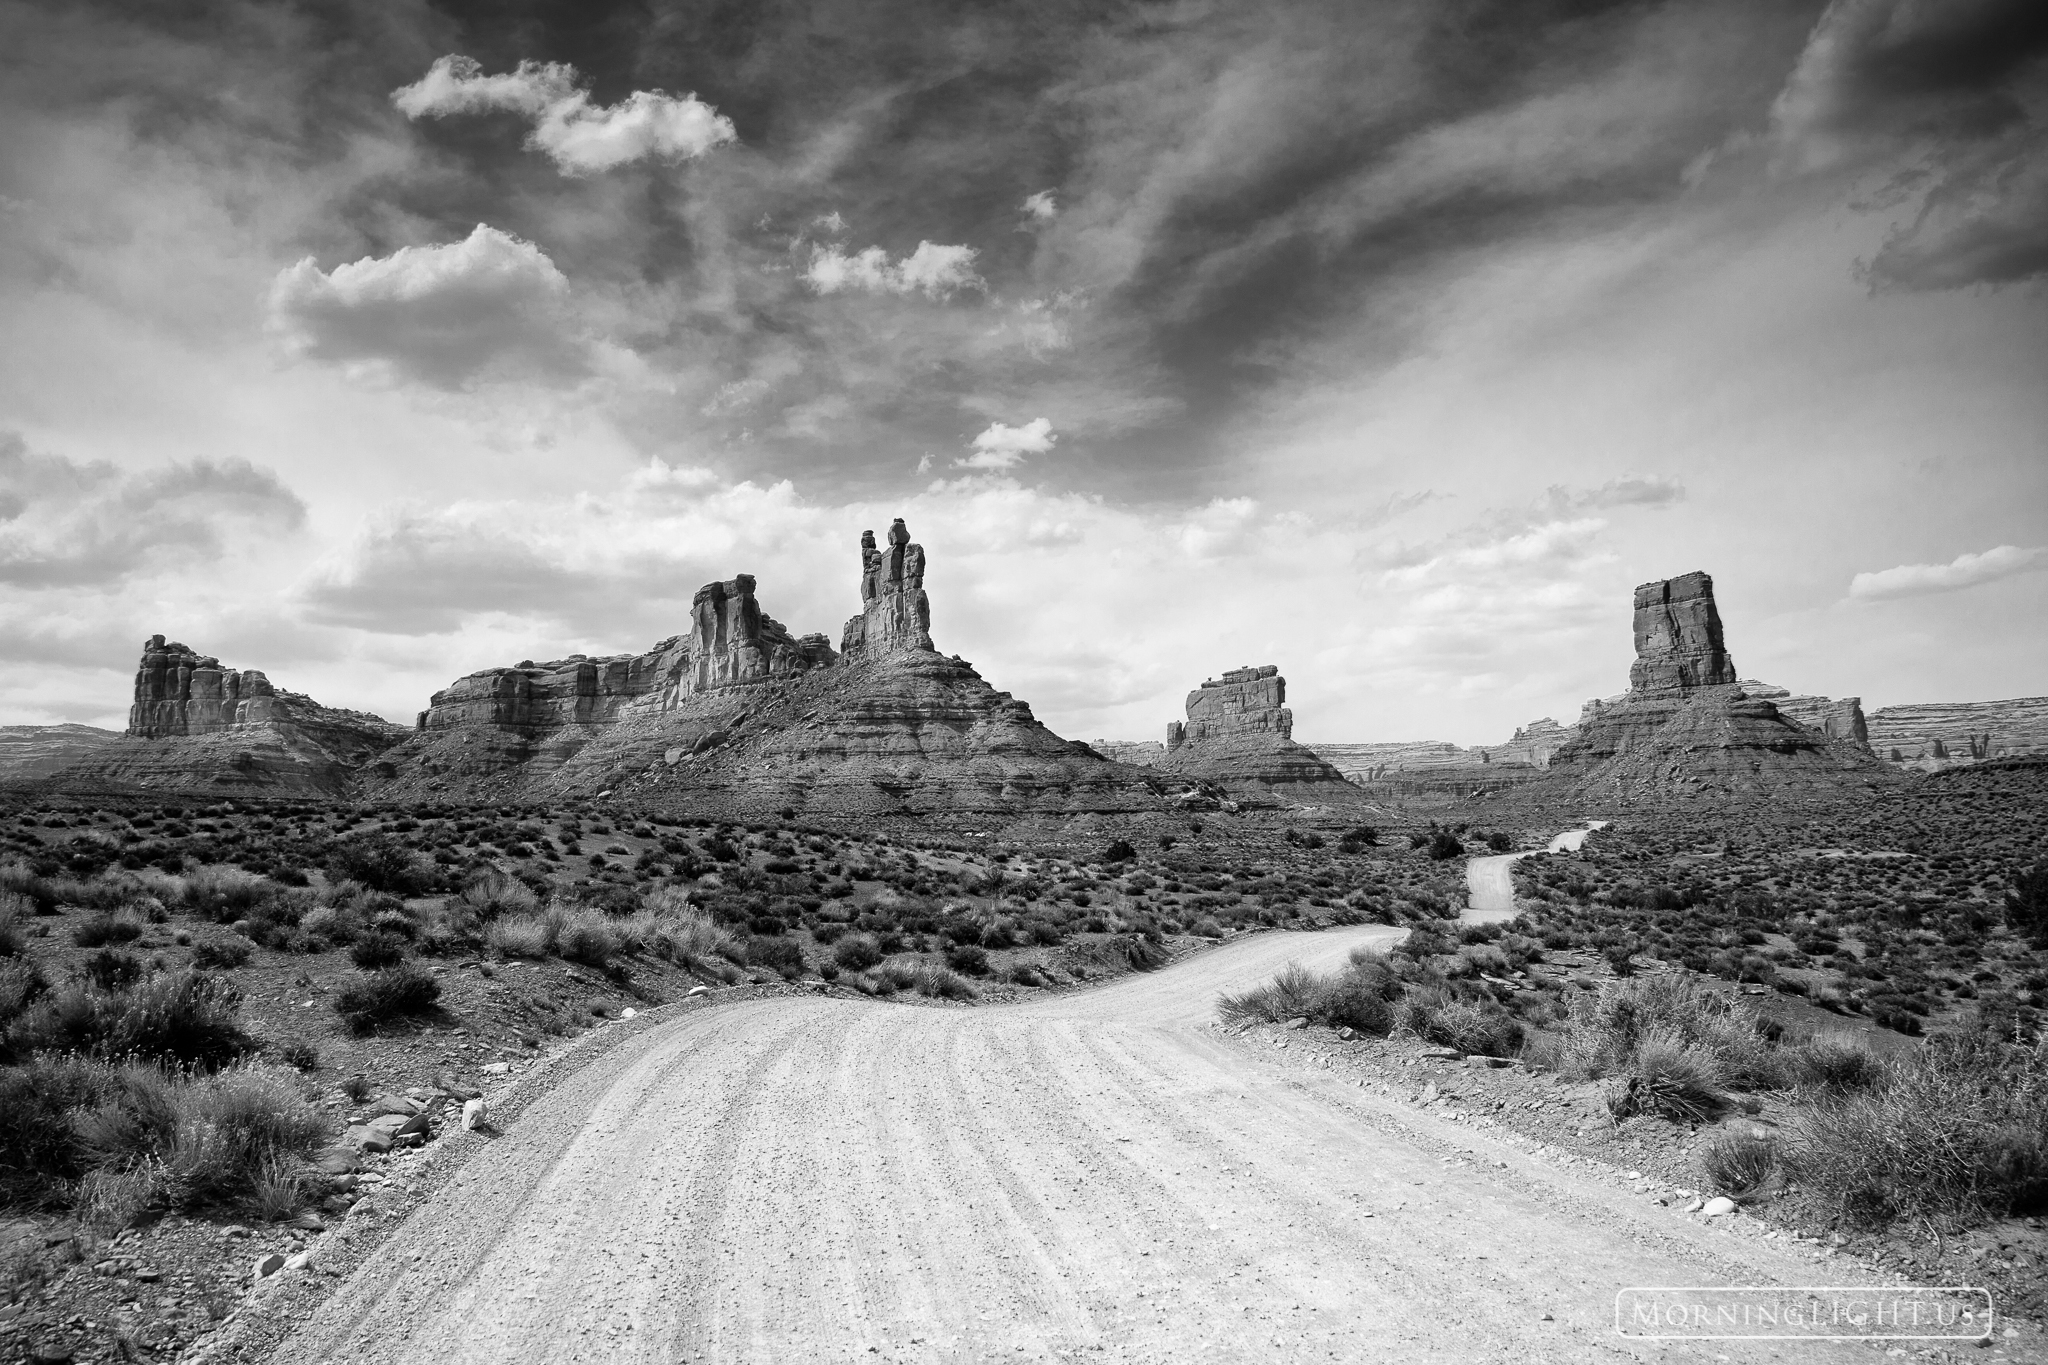 This image of a winding road in Valley of the Gods, Utah captures something of that classic desert southwest feel as the road...